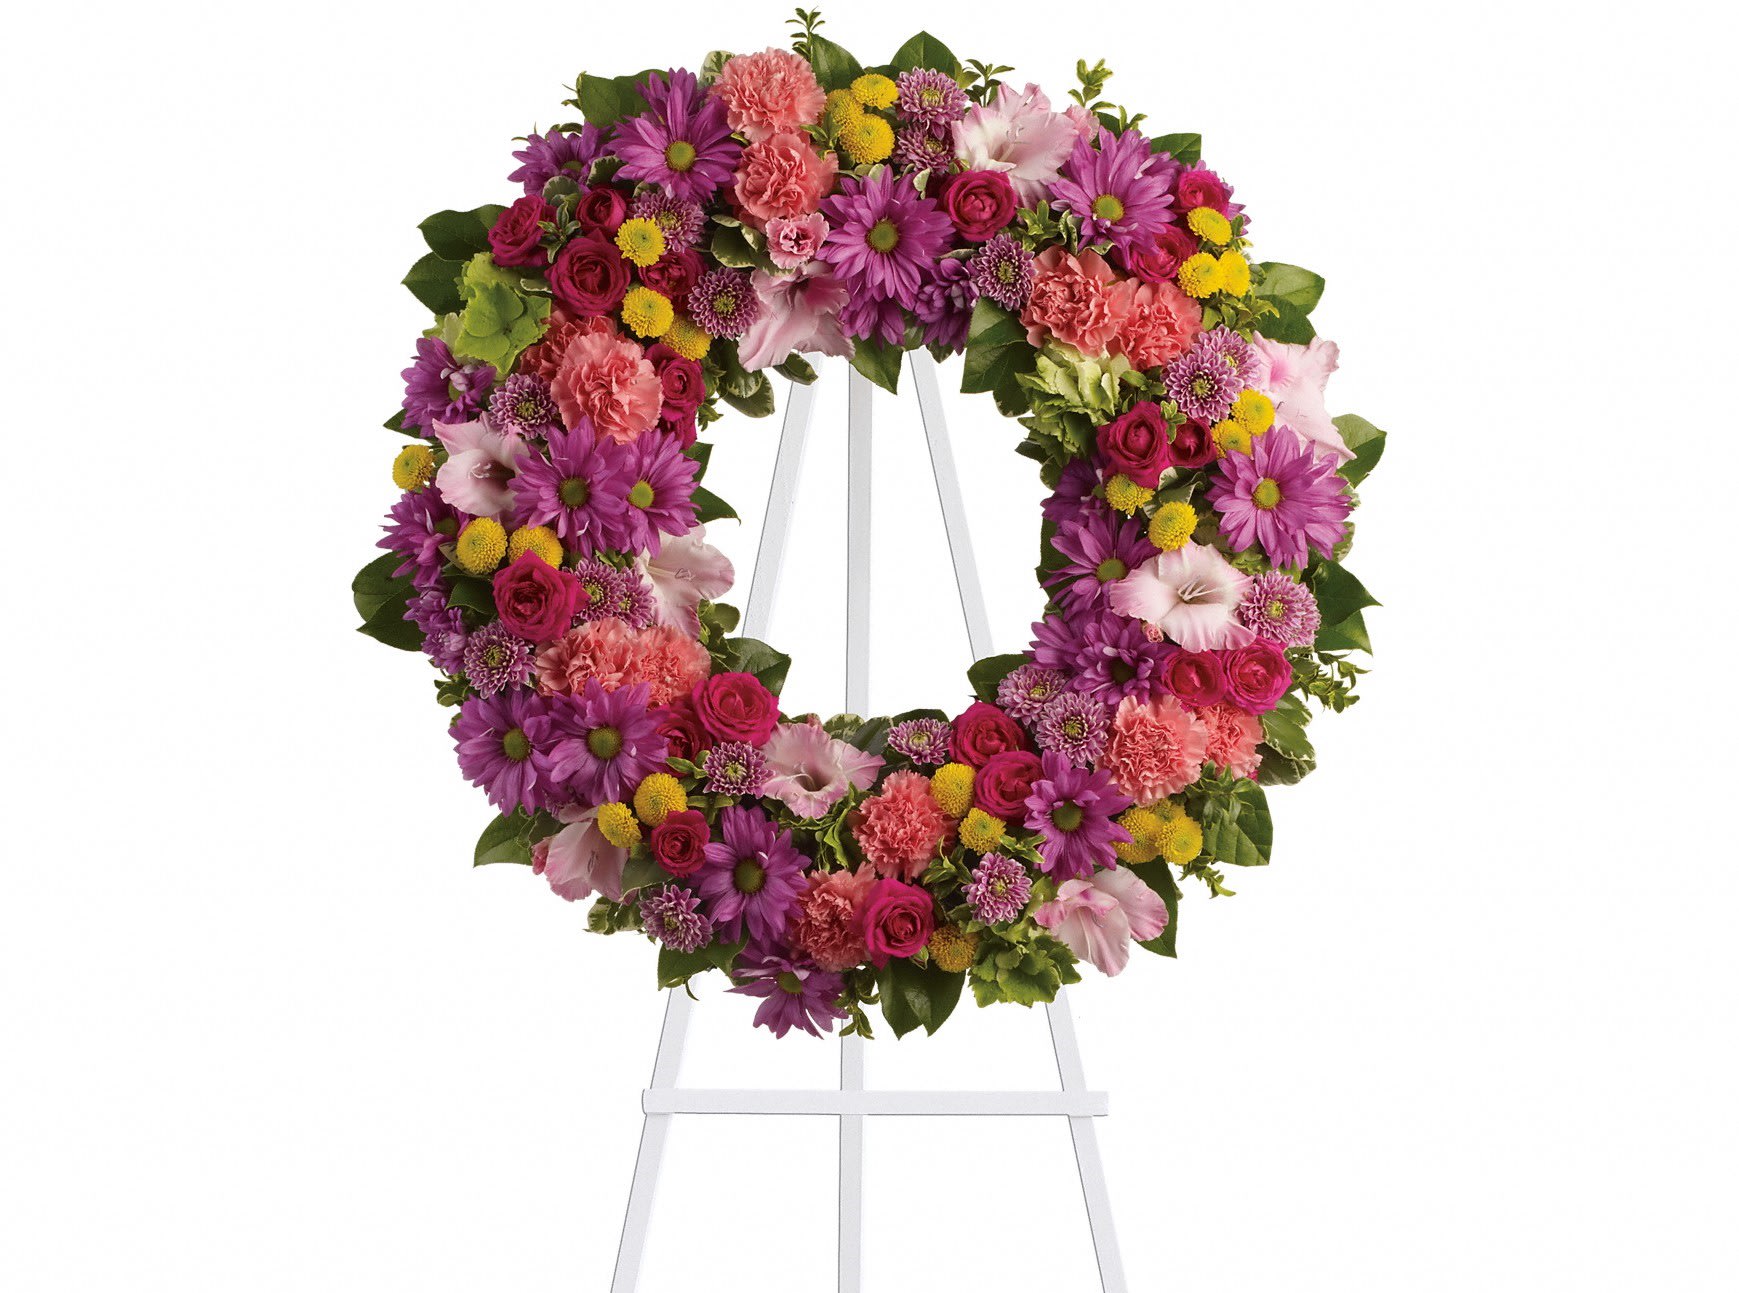  Ringed by Love - The memory of brighter days is always a comfort to those in mourning. This lovely wreath will display your compassion beautifully.  Orientation: One-Sided